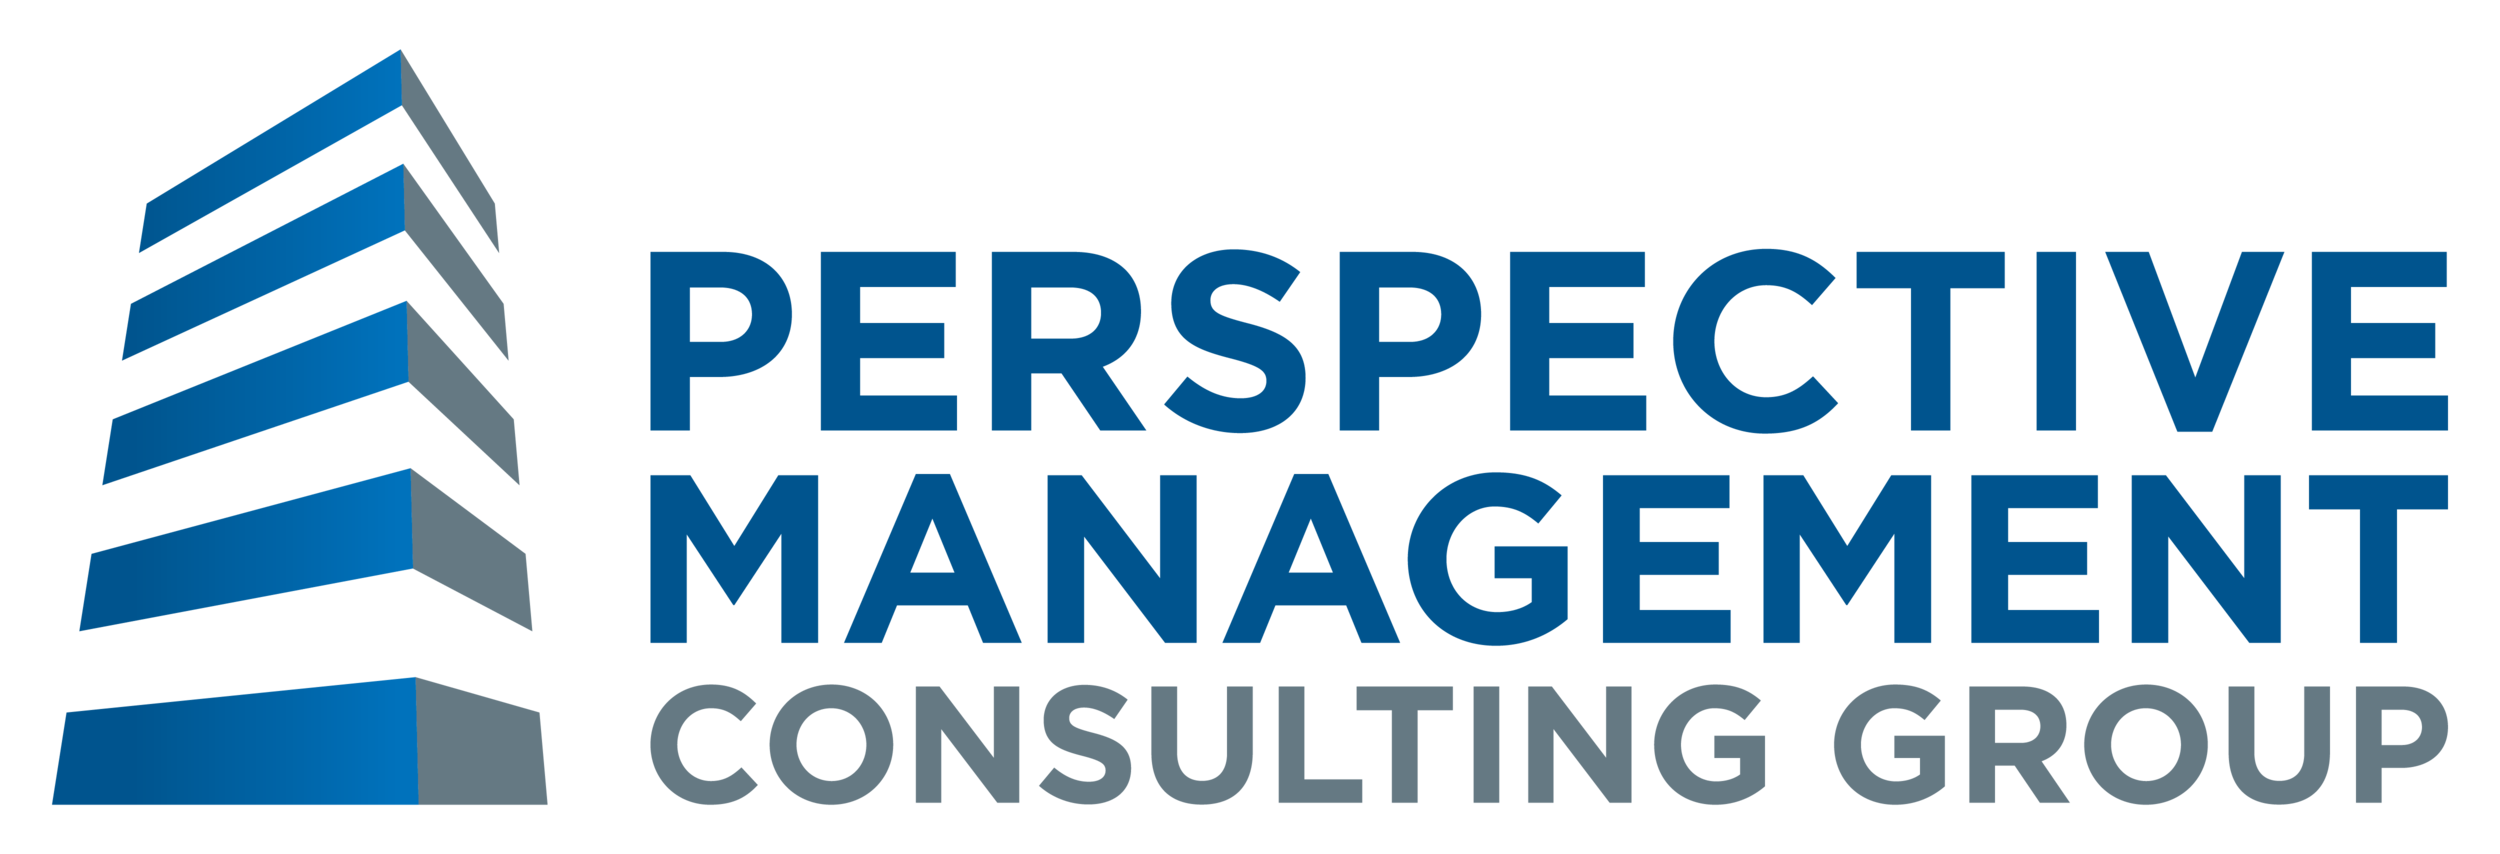 Perspective Management Consulting Group